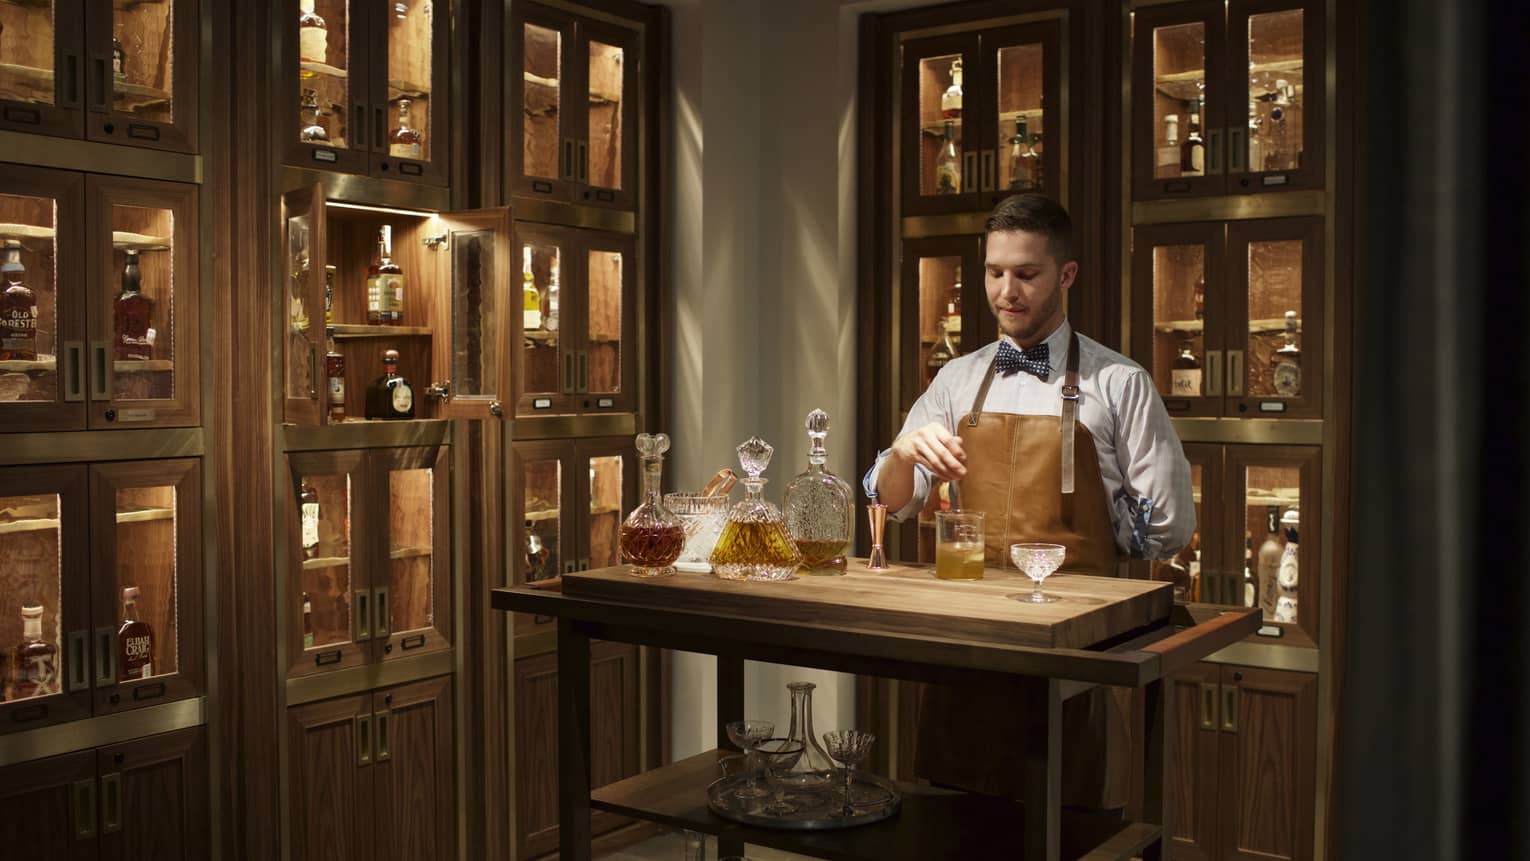 Bayou & Bottle mixologist in apron stirs bourbon cocktail, surrounded by illuminated display cases with bottles 